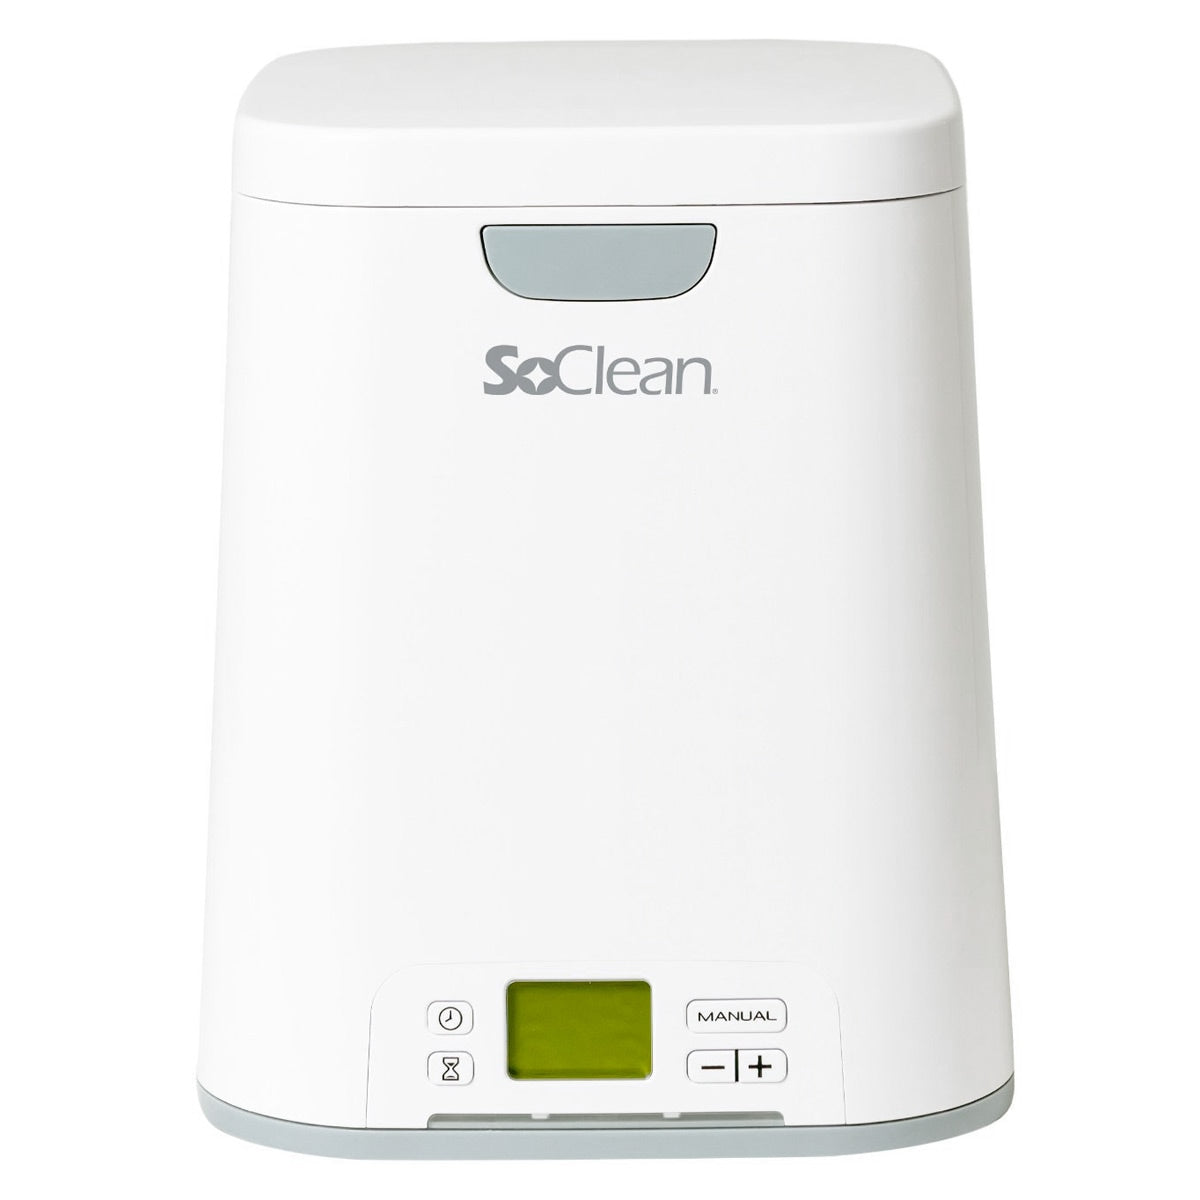 SoClean 2 CPAP/BiPAP Cleaner & Sanitizer (Includes Tubing Adapter)